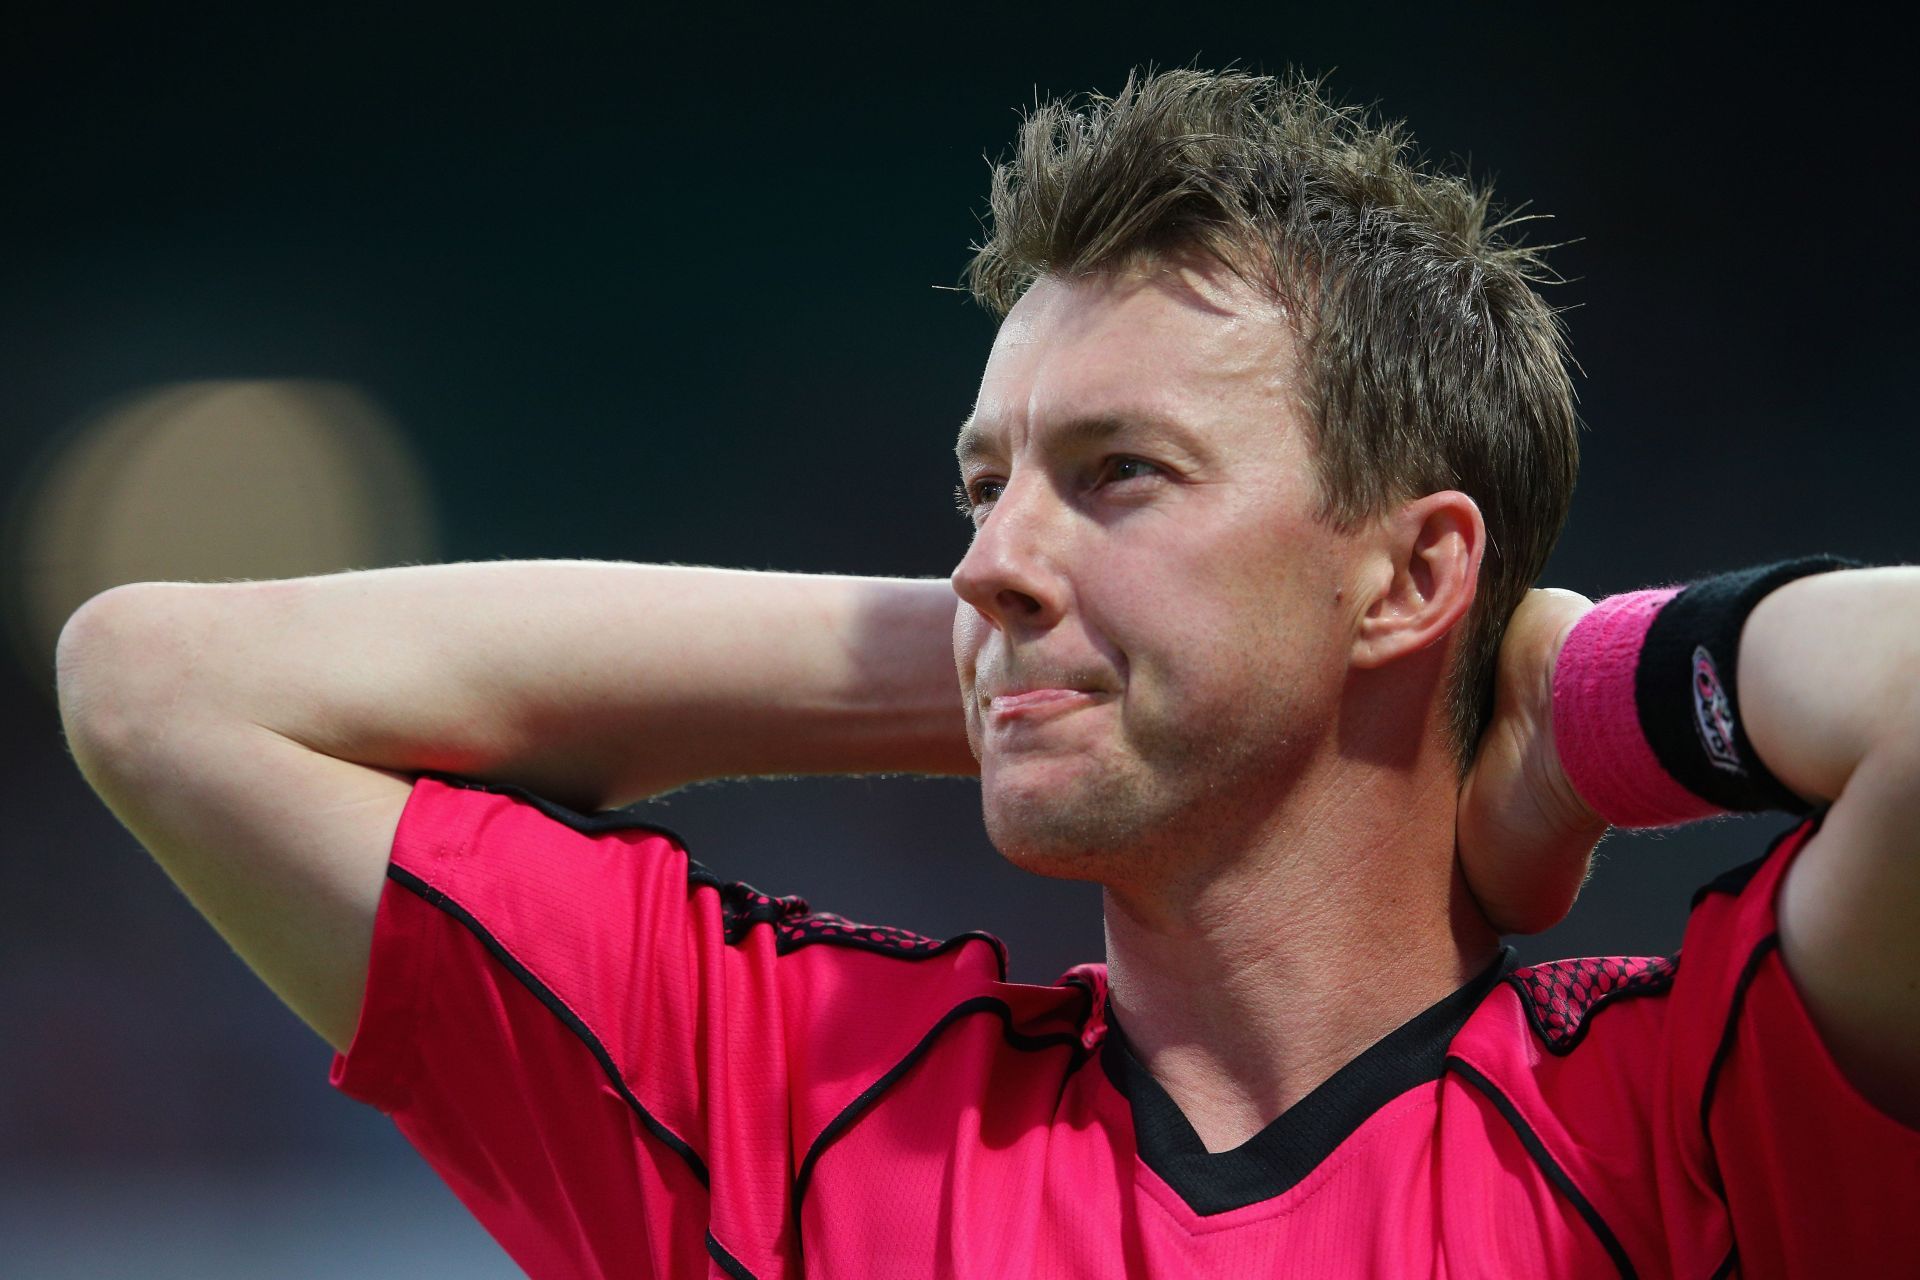 Brett Lee defended 8 runs in the final over against India Maharajas to take the World Giants to the final.